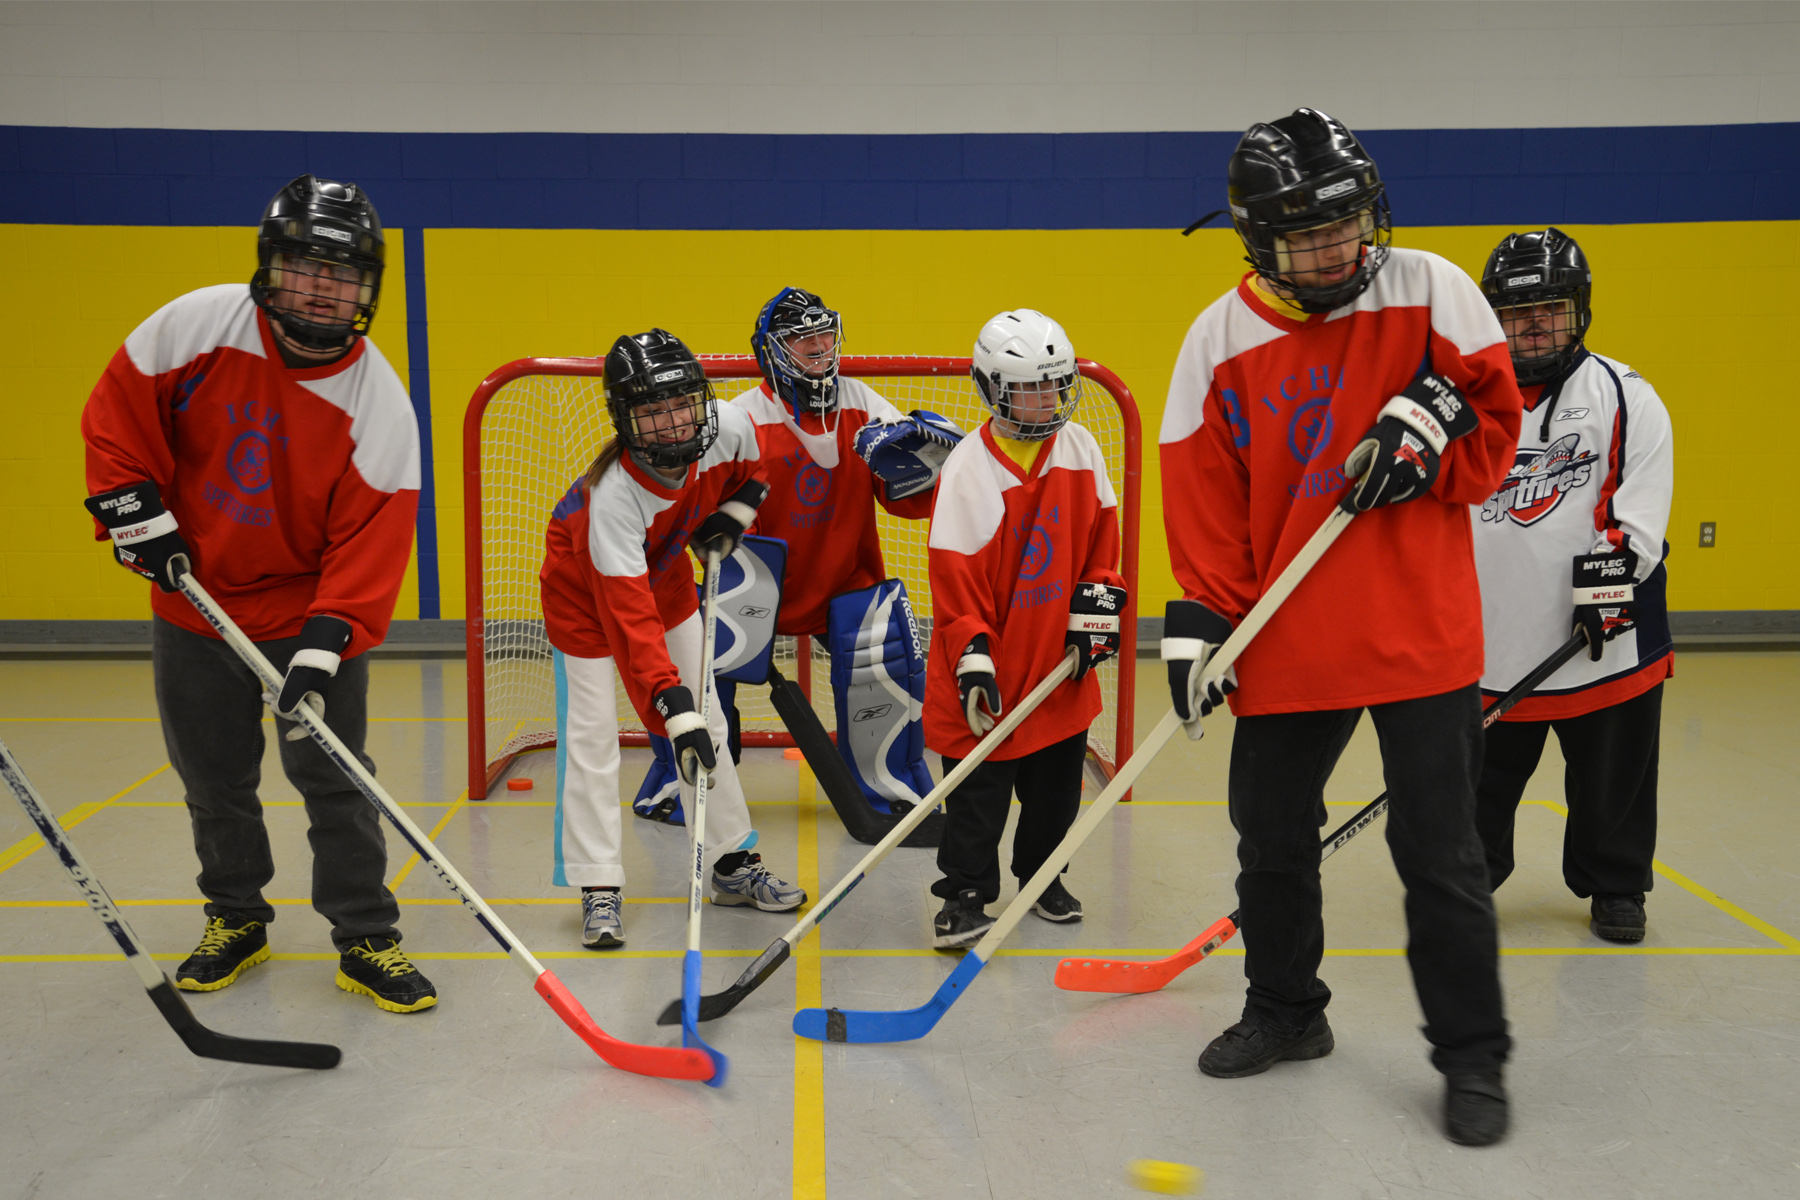 ICHA Floor Hockey players lined up in front of the net